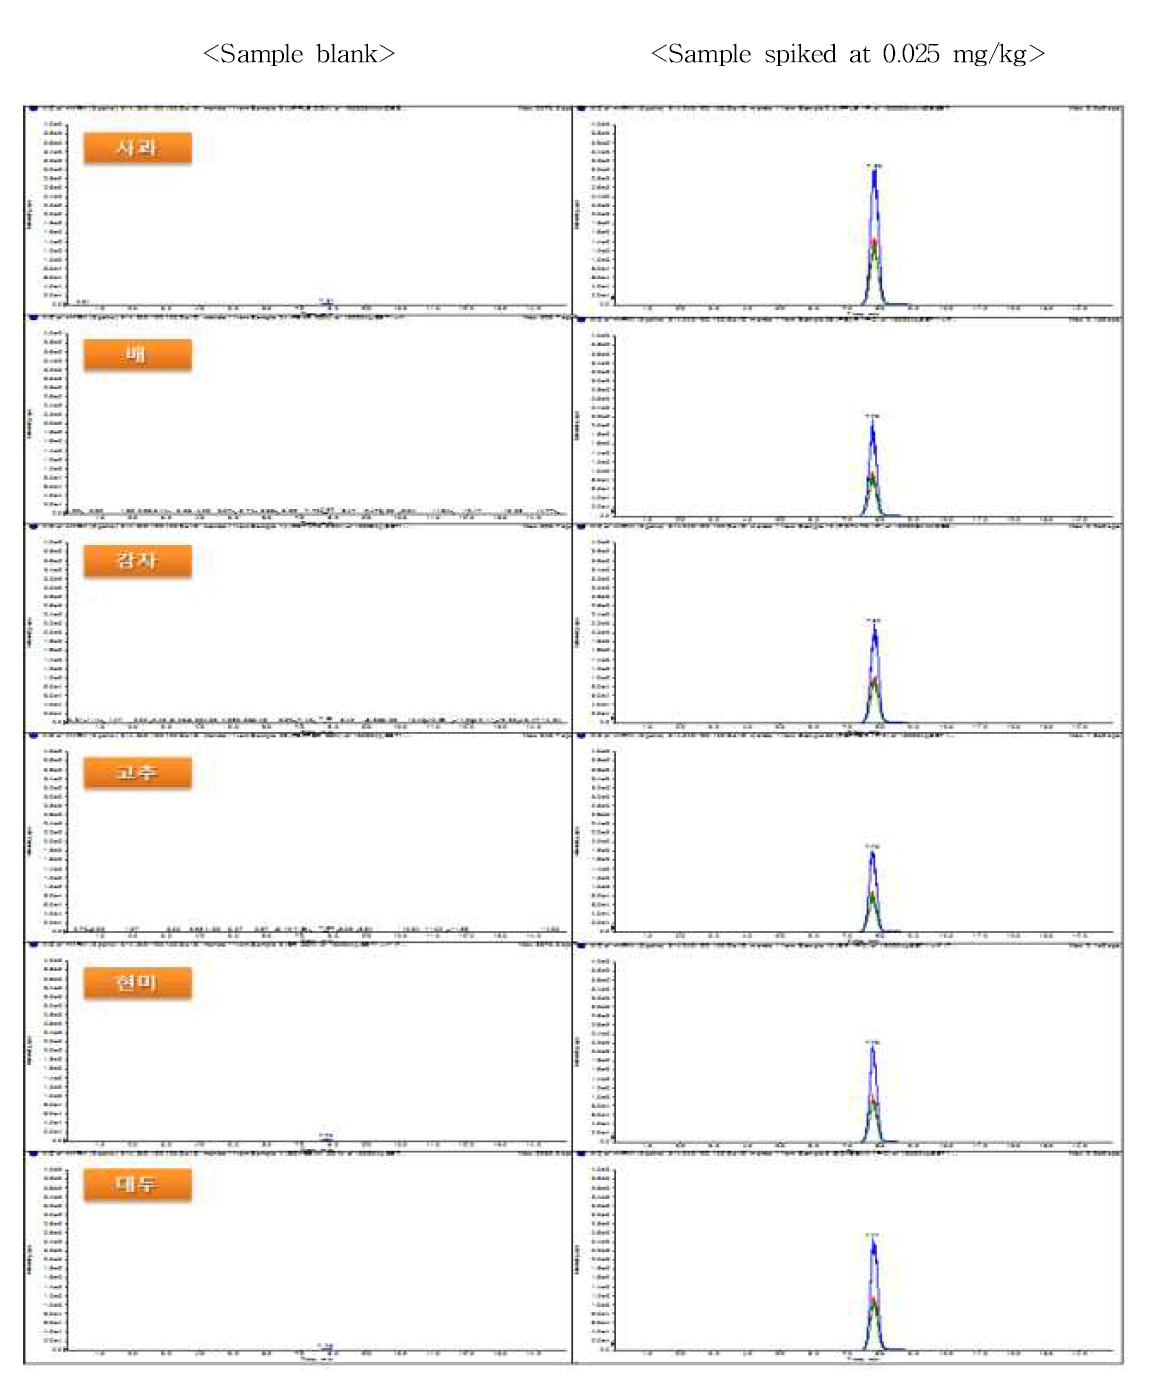 Chromatogram of sample extracts obtained by sample preparation and HPLC-MS/MS MRM mode analysis at 0.025 mg/kg spiking level